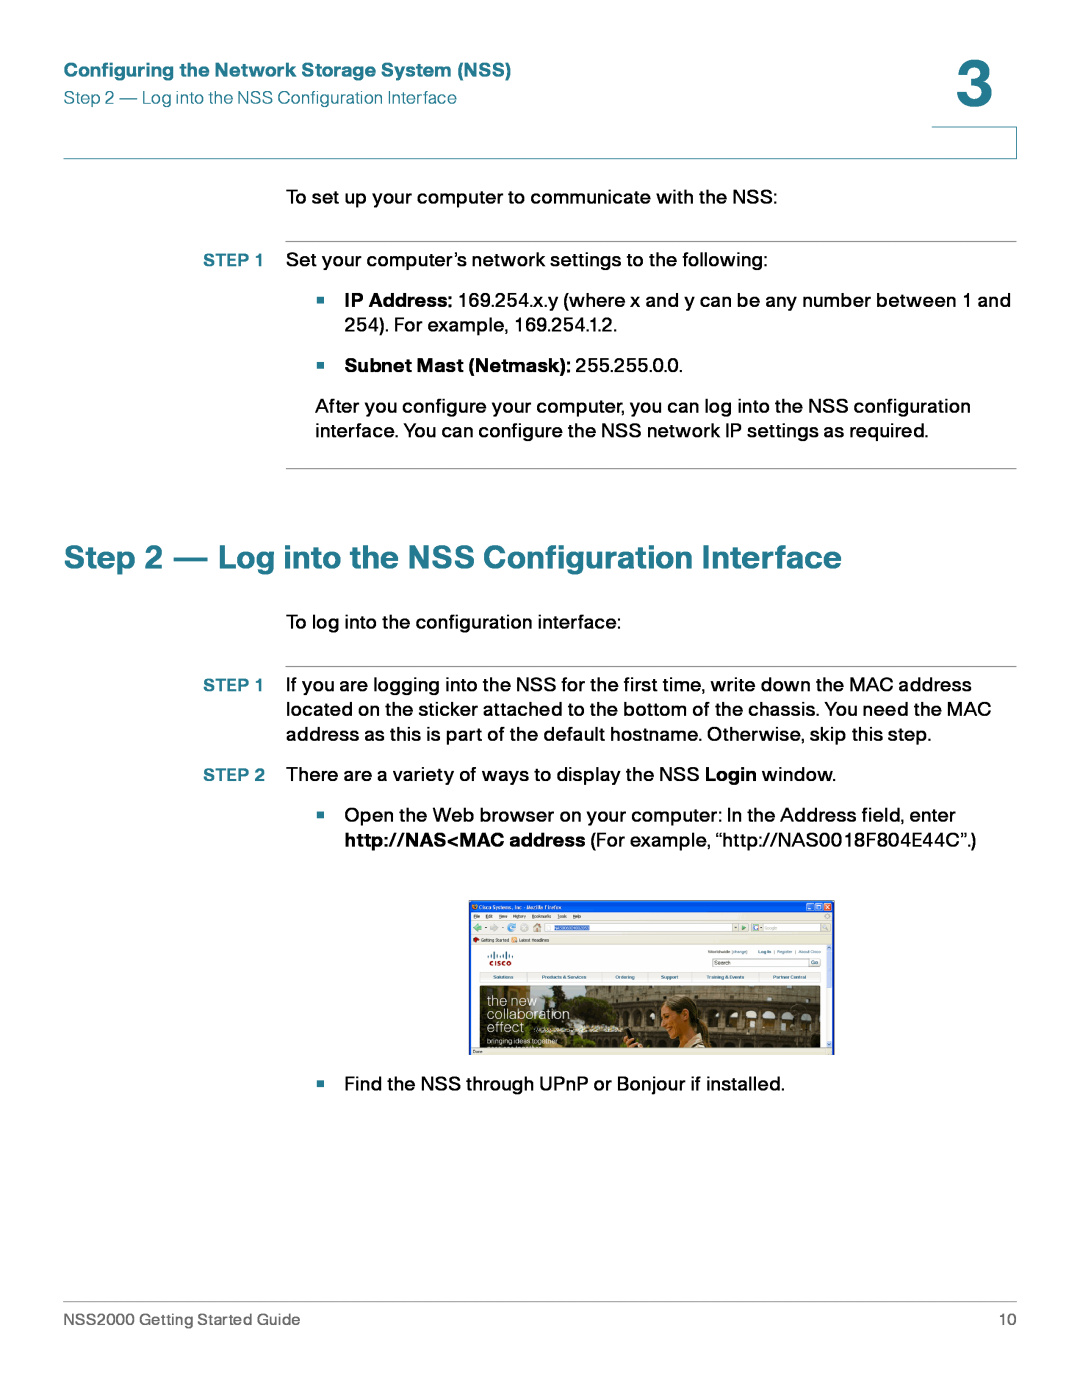 Cisco Systems NSS2000 Series manual Log into the NSS Configuration Interface, Configuring the Network Storage System NSS 